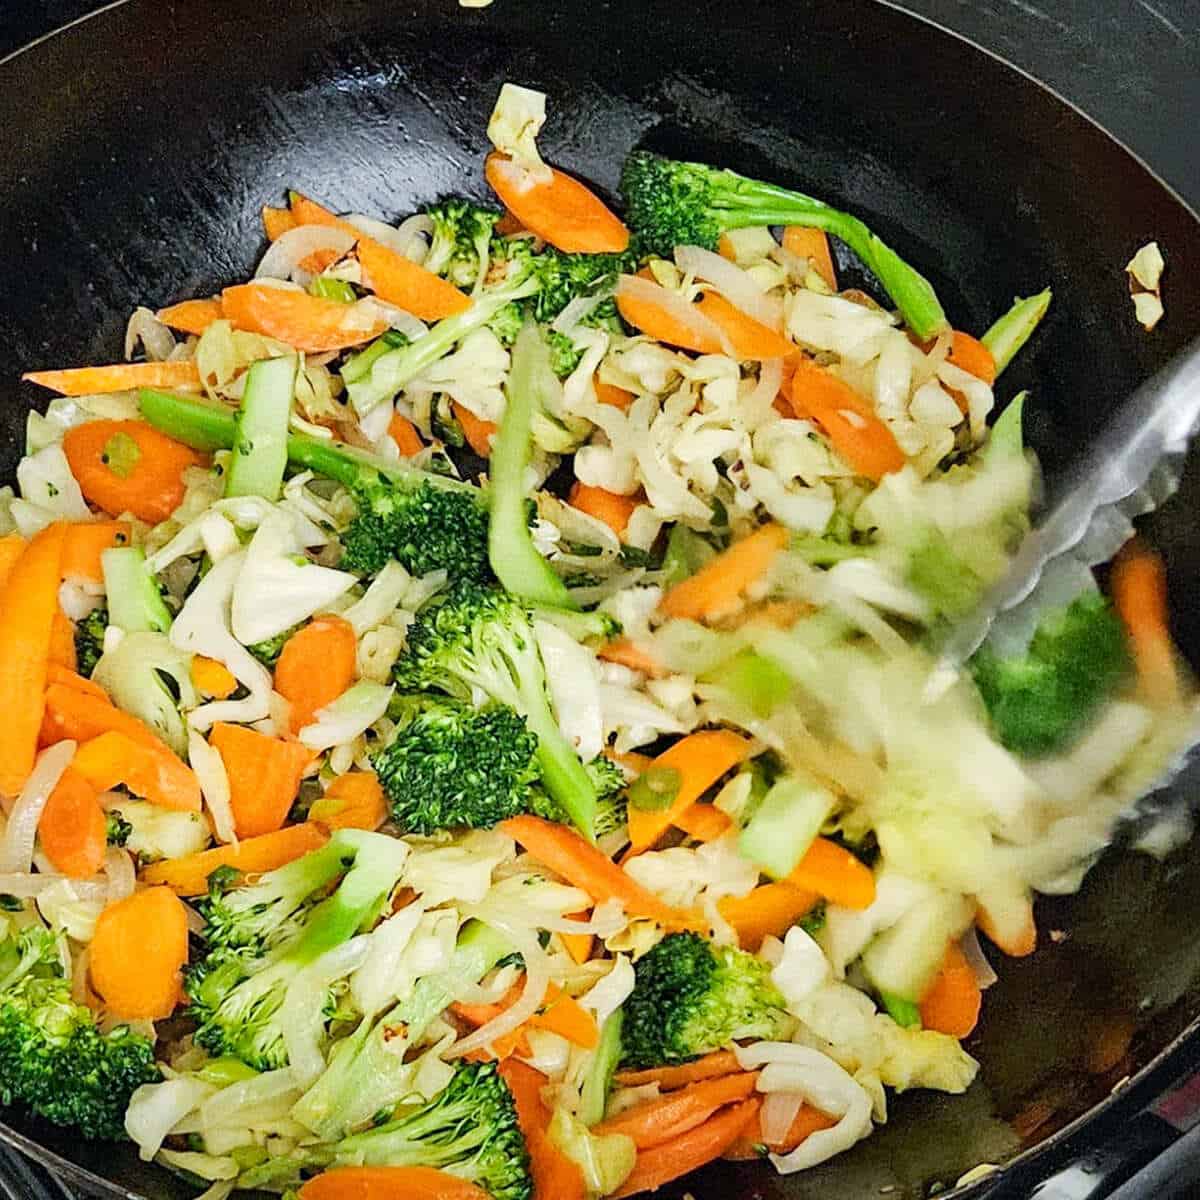 stir frying the vegetables in the wok for the easy Asian vegetable stir fry rice noodles recipe